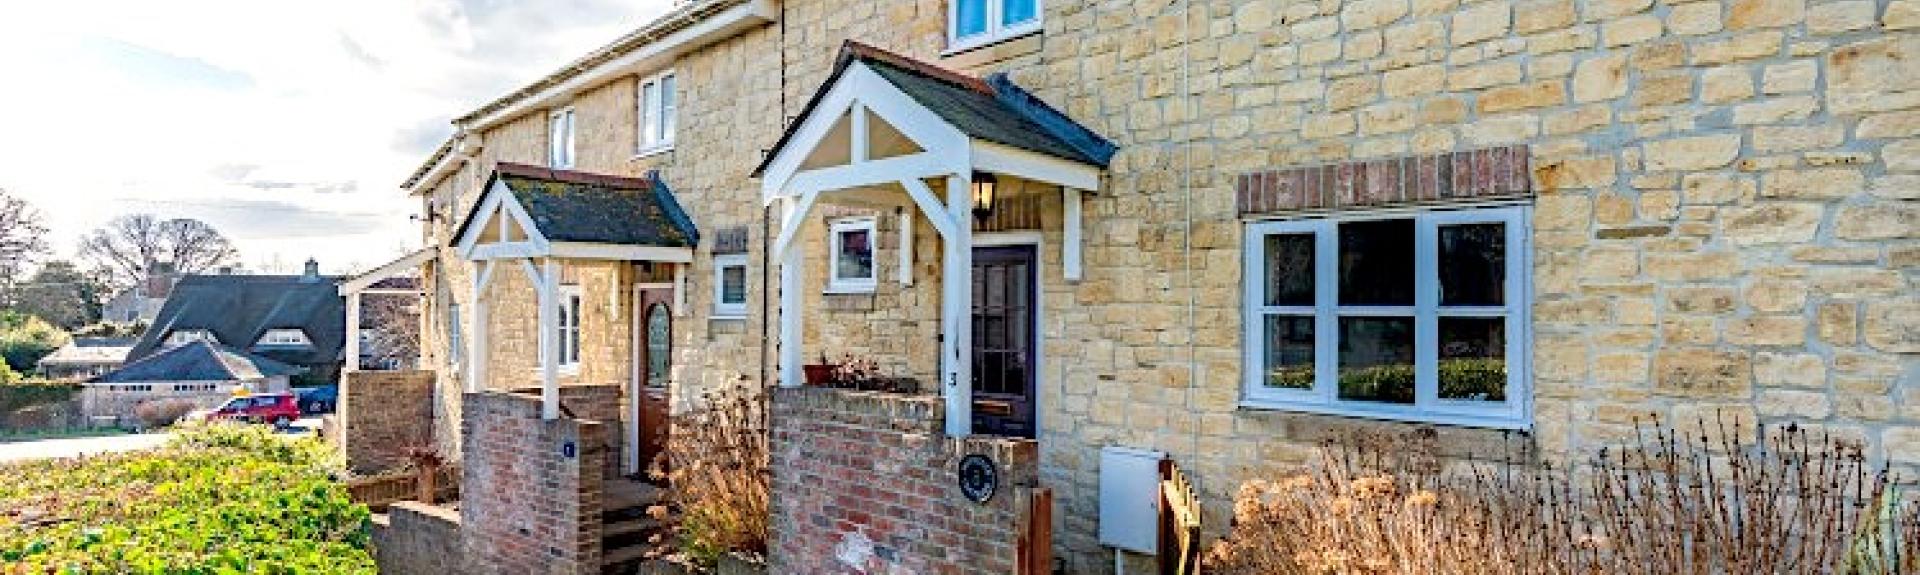 A limestone-built Dorset holiday cottage with a porch and tiny front garden.